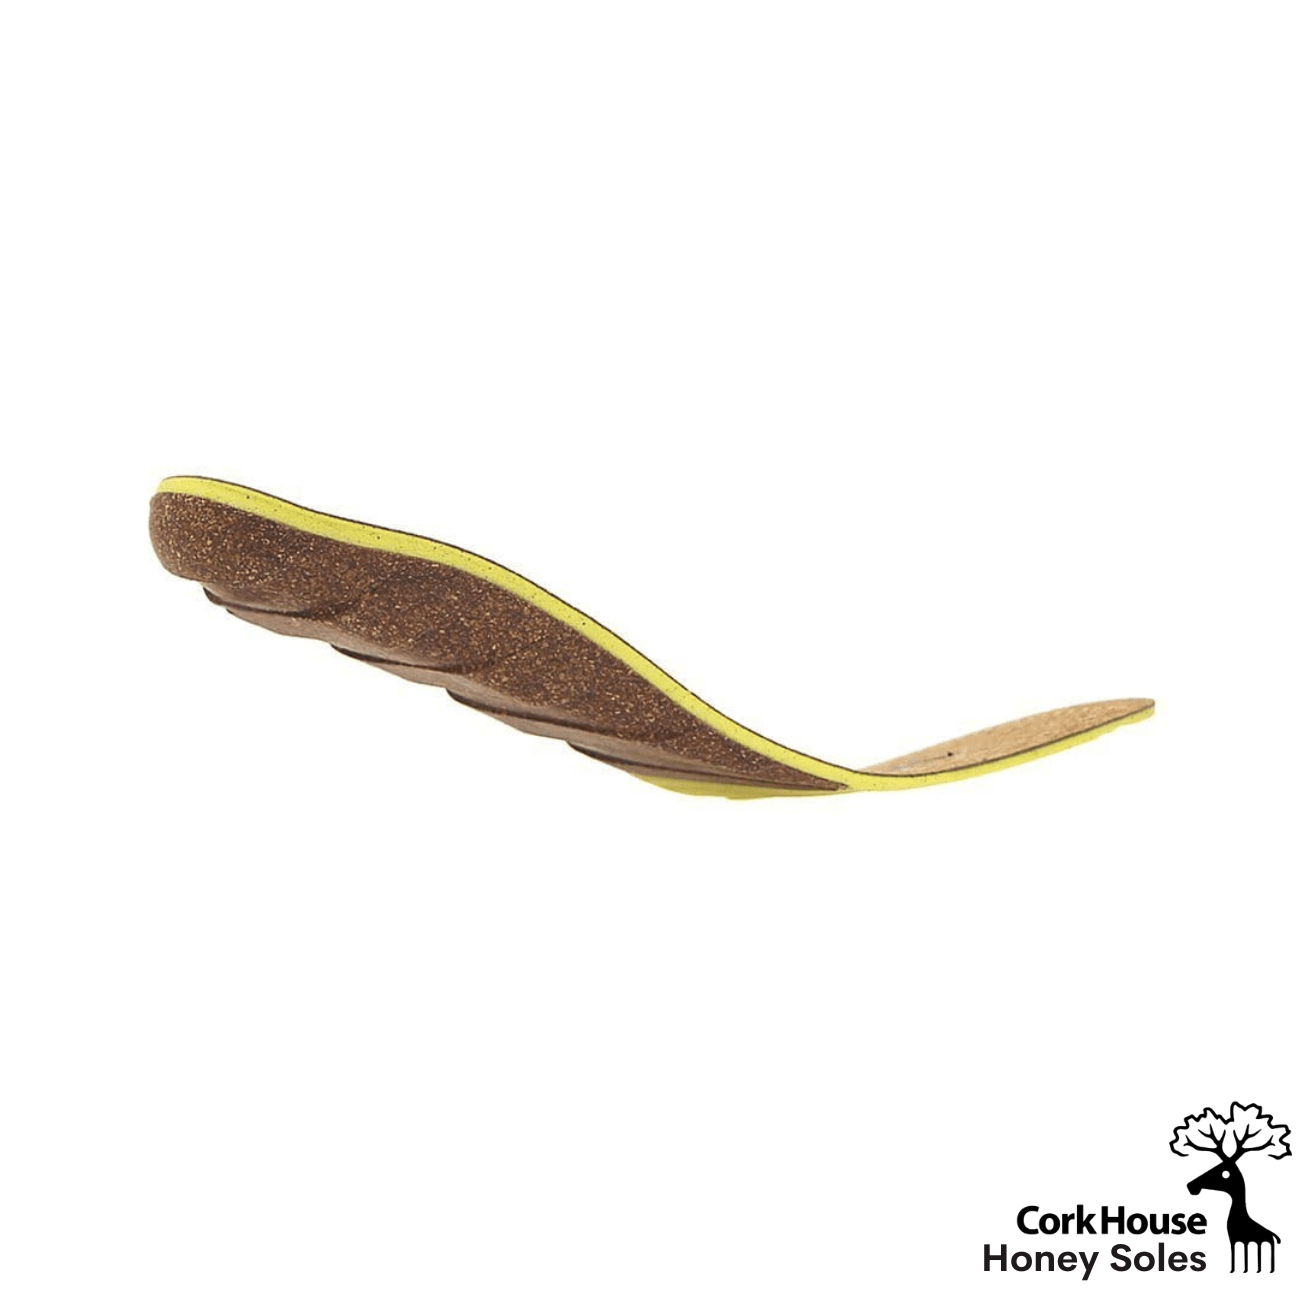 A side view of the cork honey sole insole showing its flexibility.